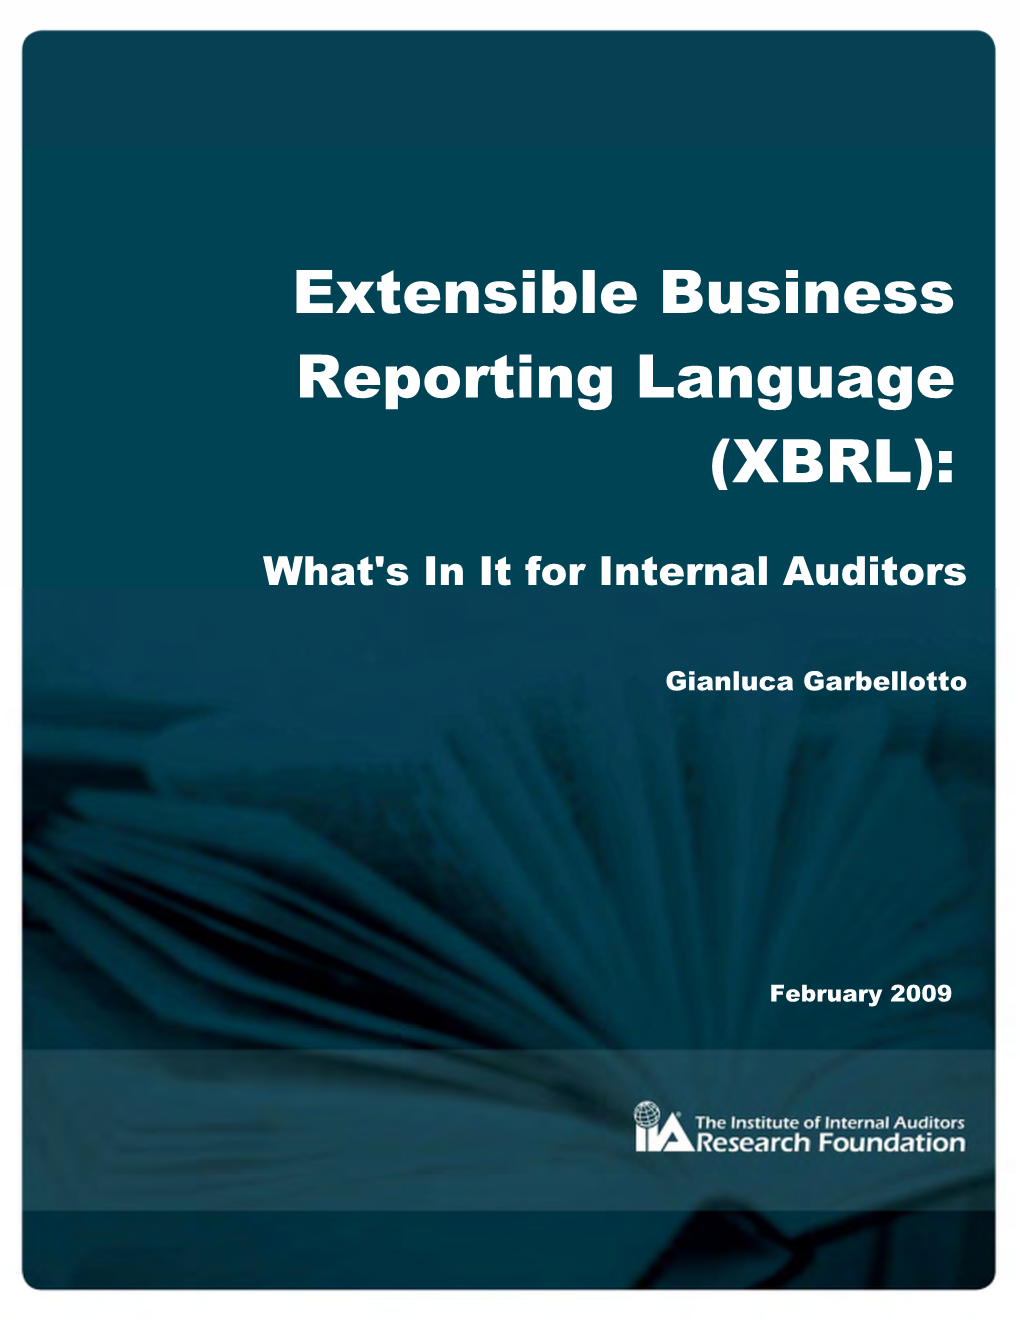 Extensible Business Reporting Language (XBRL)